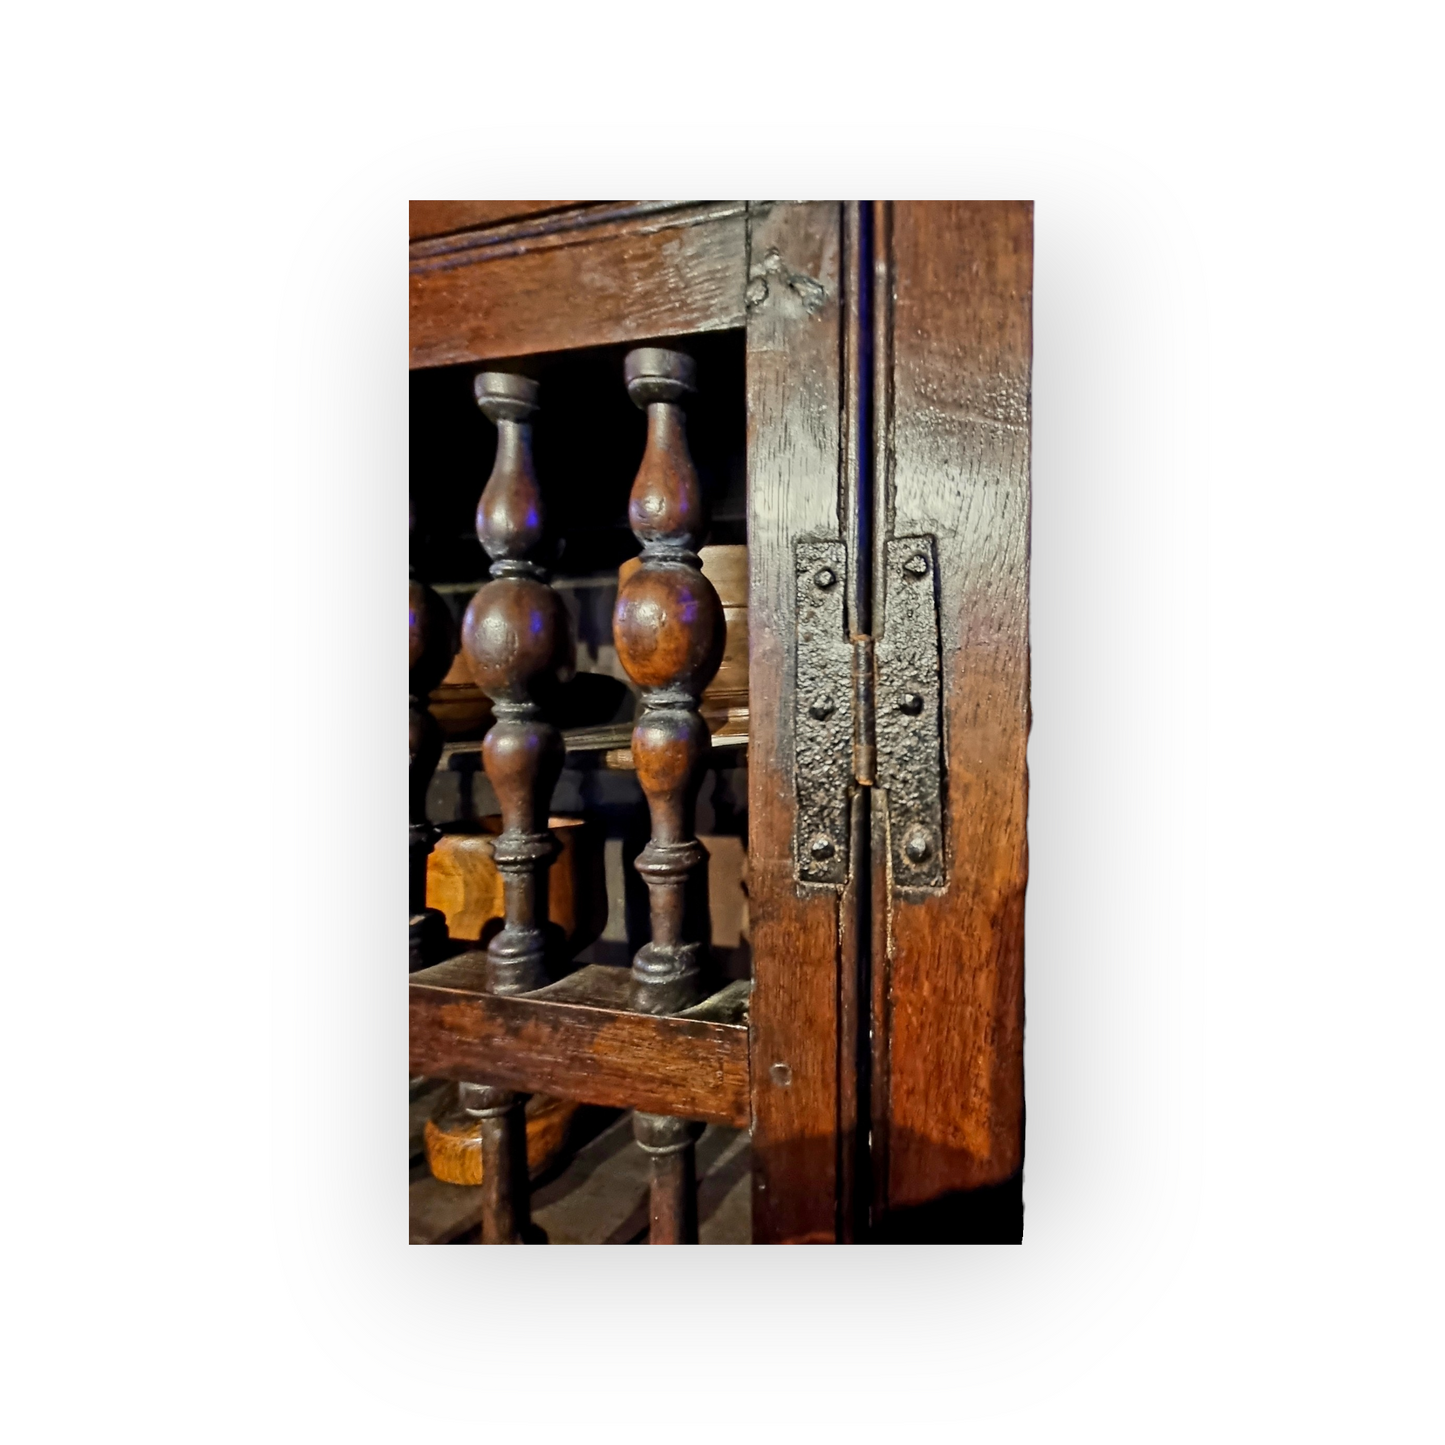 Assessed By Victor Chinnery in 2001 - Ex-Tony Chapman Collection - A William & Mary English Antique Oak Spindle Mural Cupboard, circa 1700